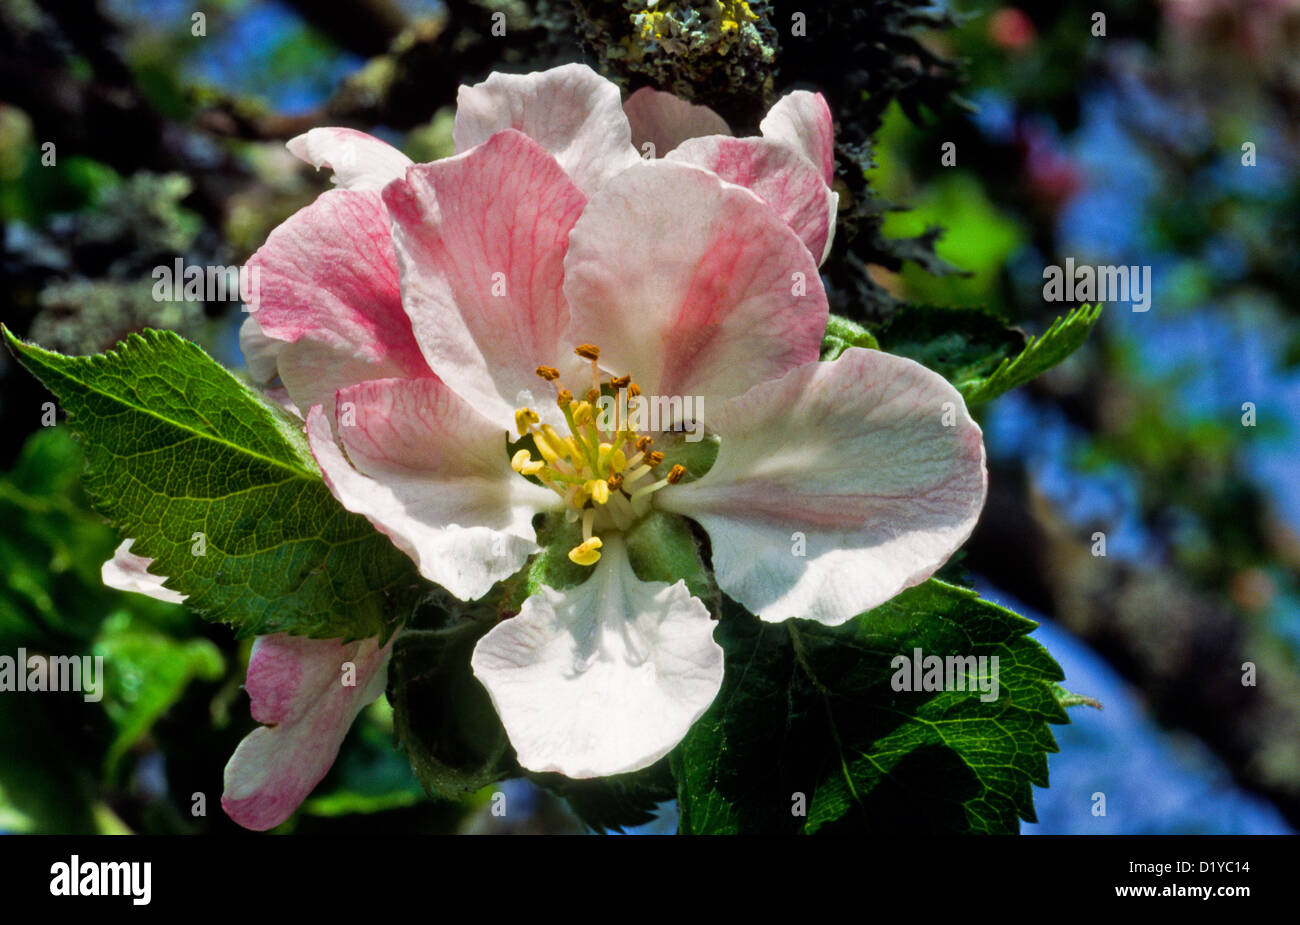 APPLE TREE [ MALUS DOMESTICA] IN FLOWER AN APPLE BLOSSOM Stock Photo